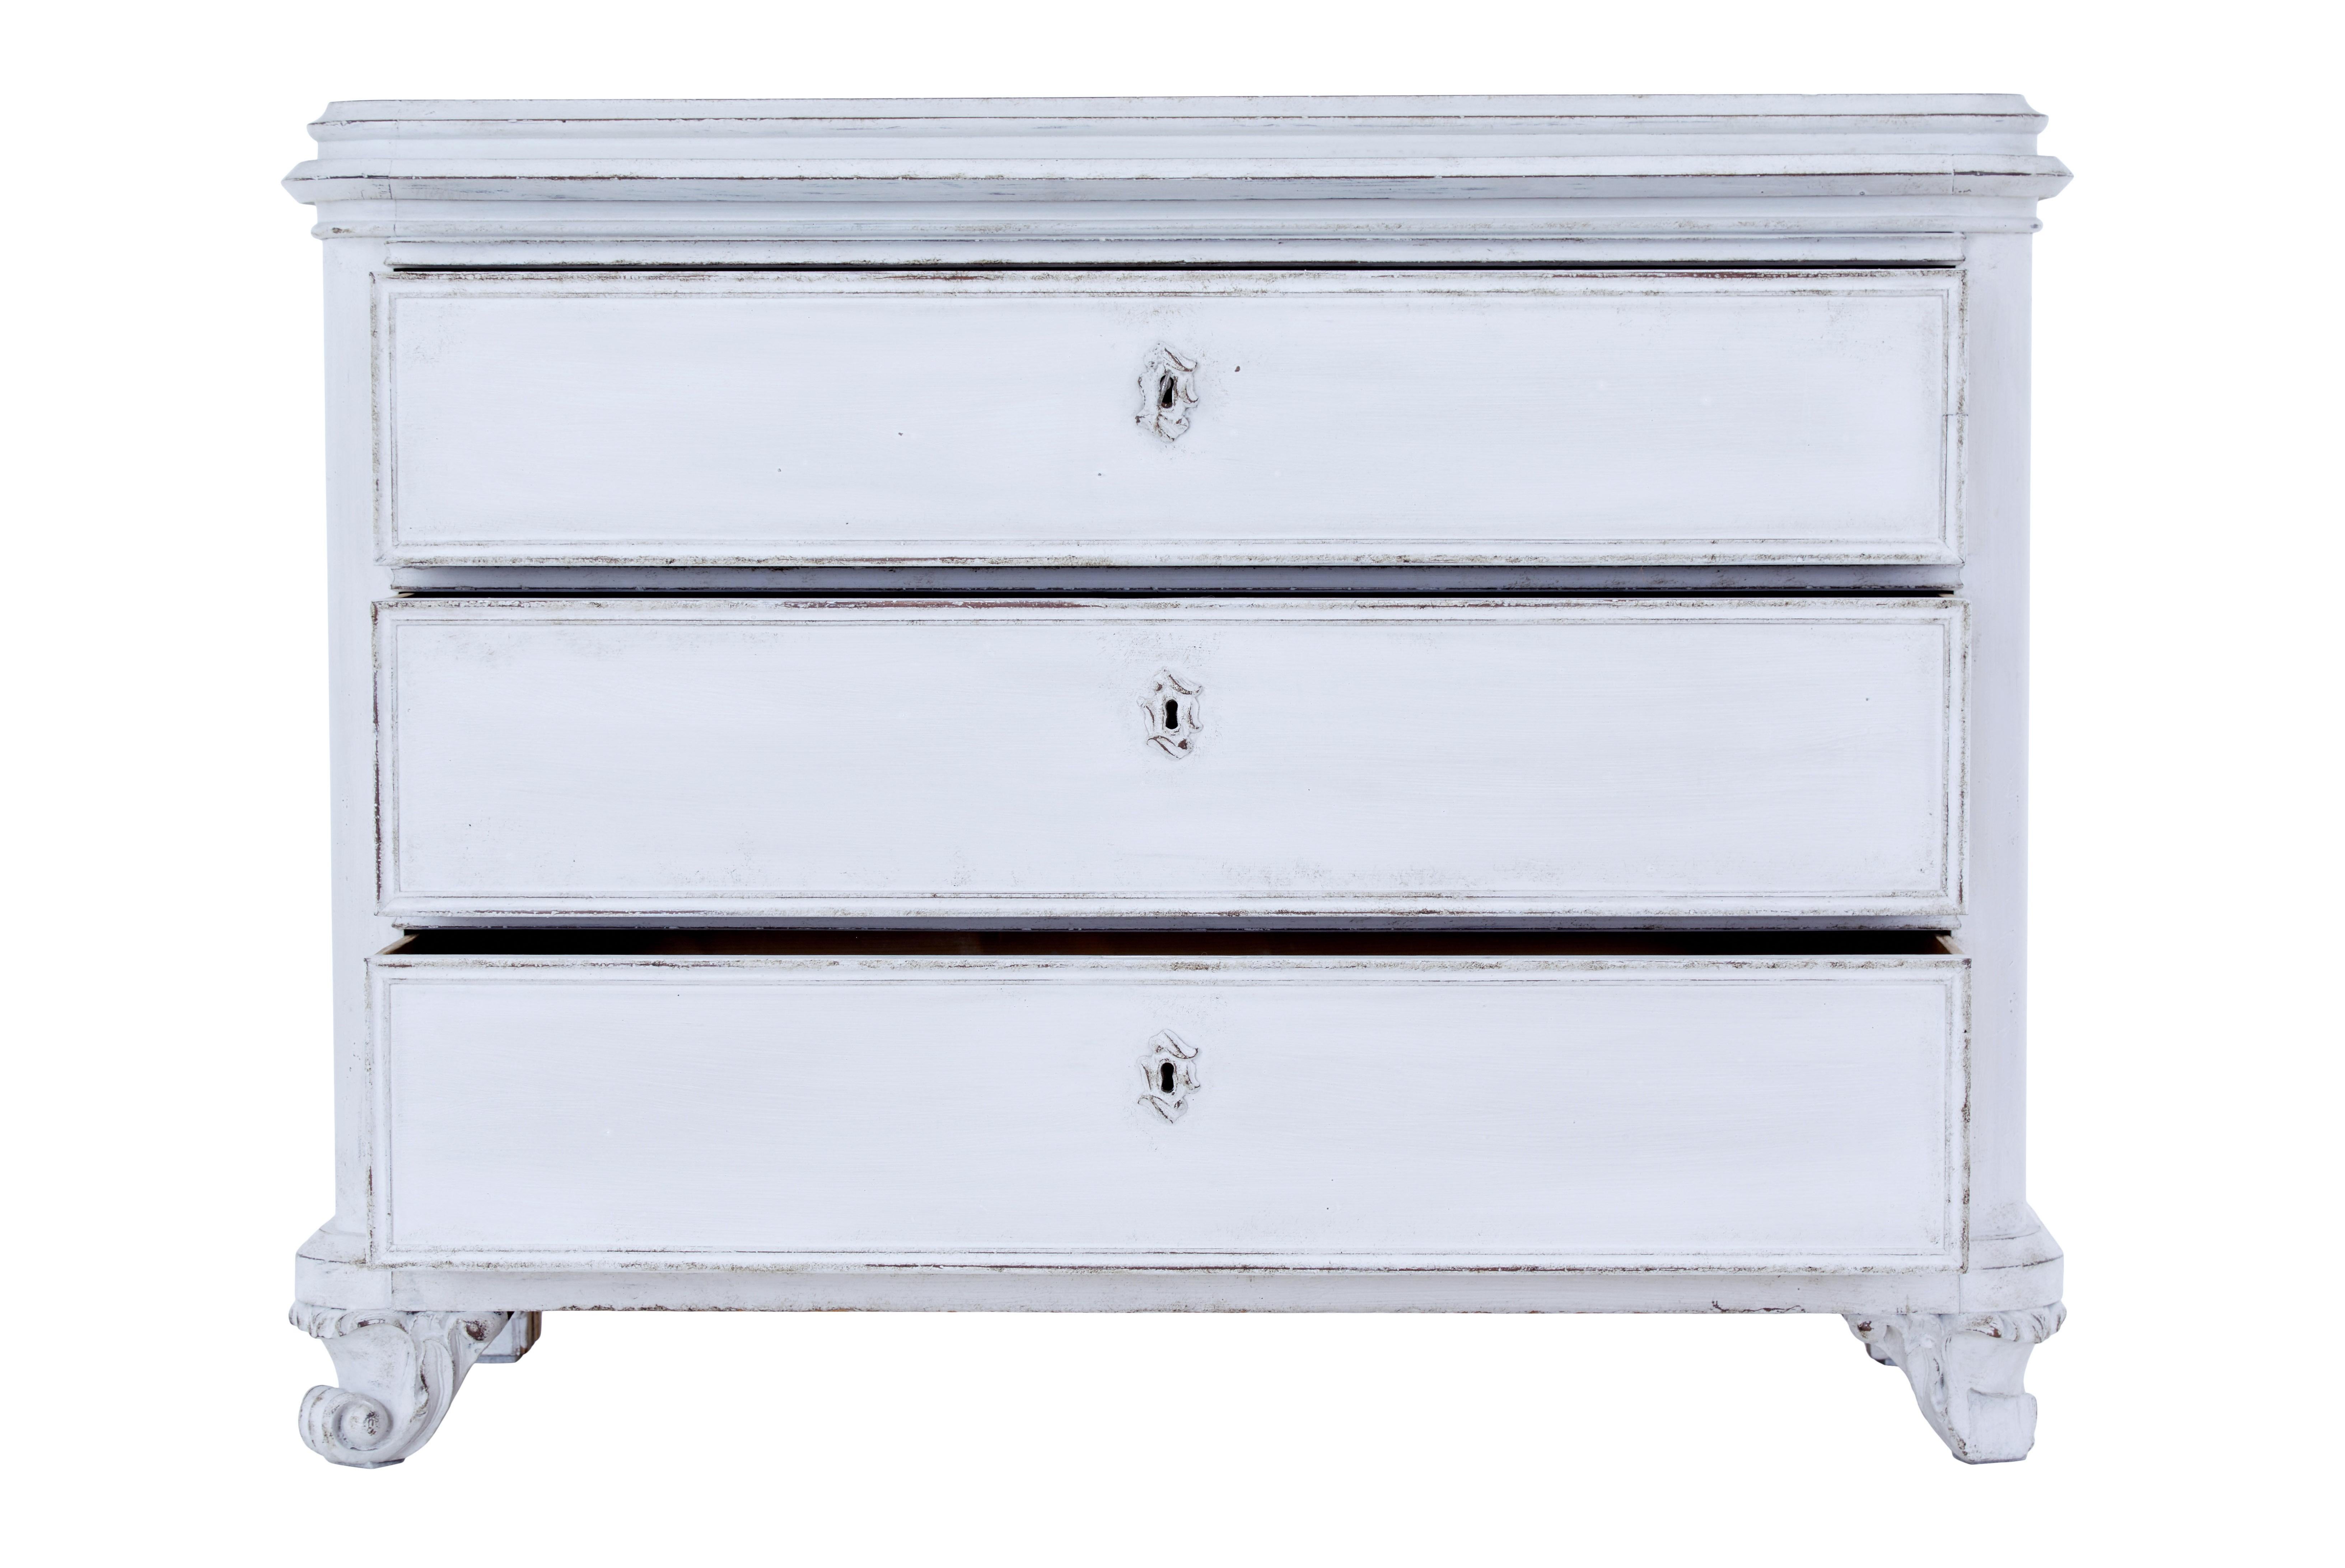 19th century painted chest of drawers circa 1870.

Substantial baroque revival Swedish chest of drawers. Presented in later paint which is best described as a very light grey or a dirty white.

Plain top with moulded edge, below which are 3